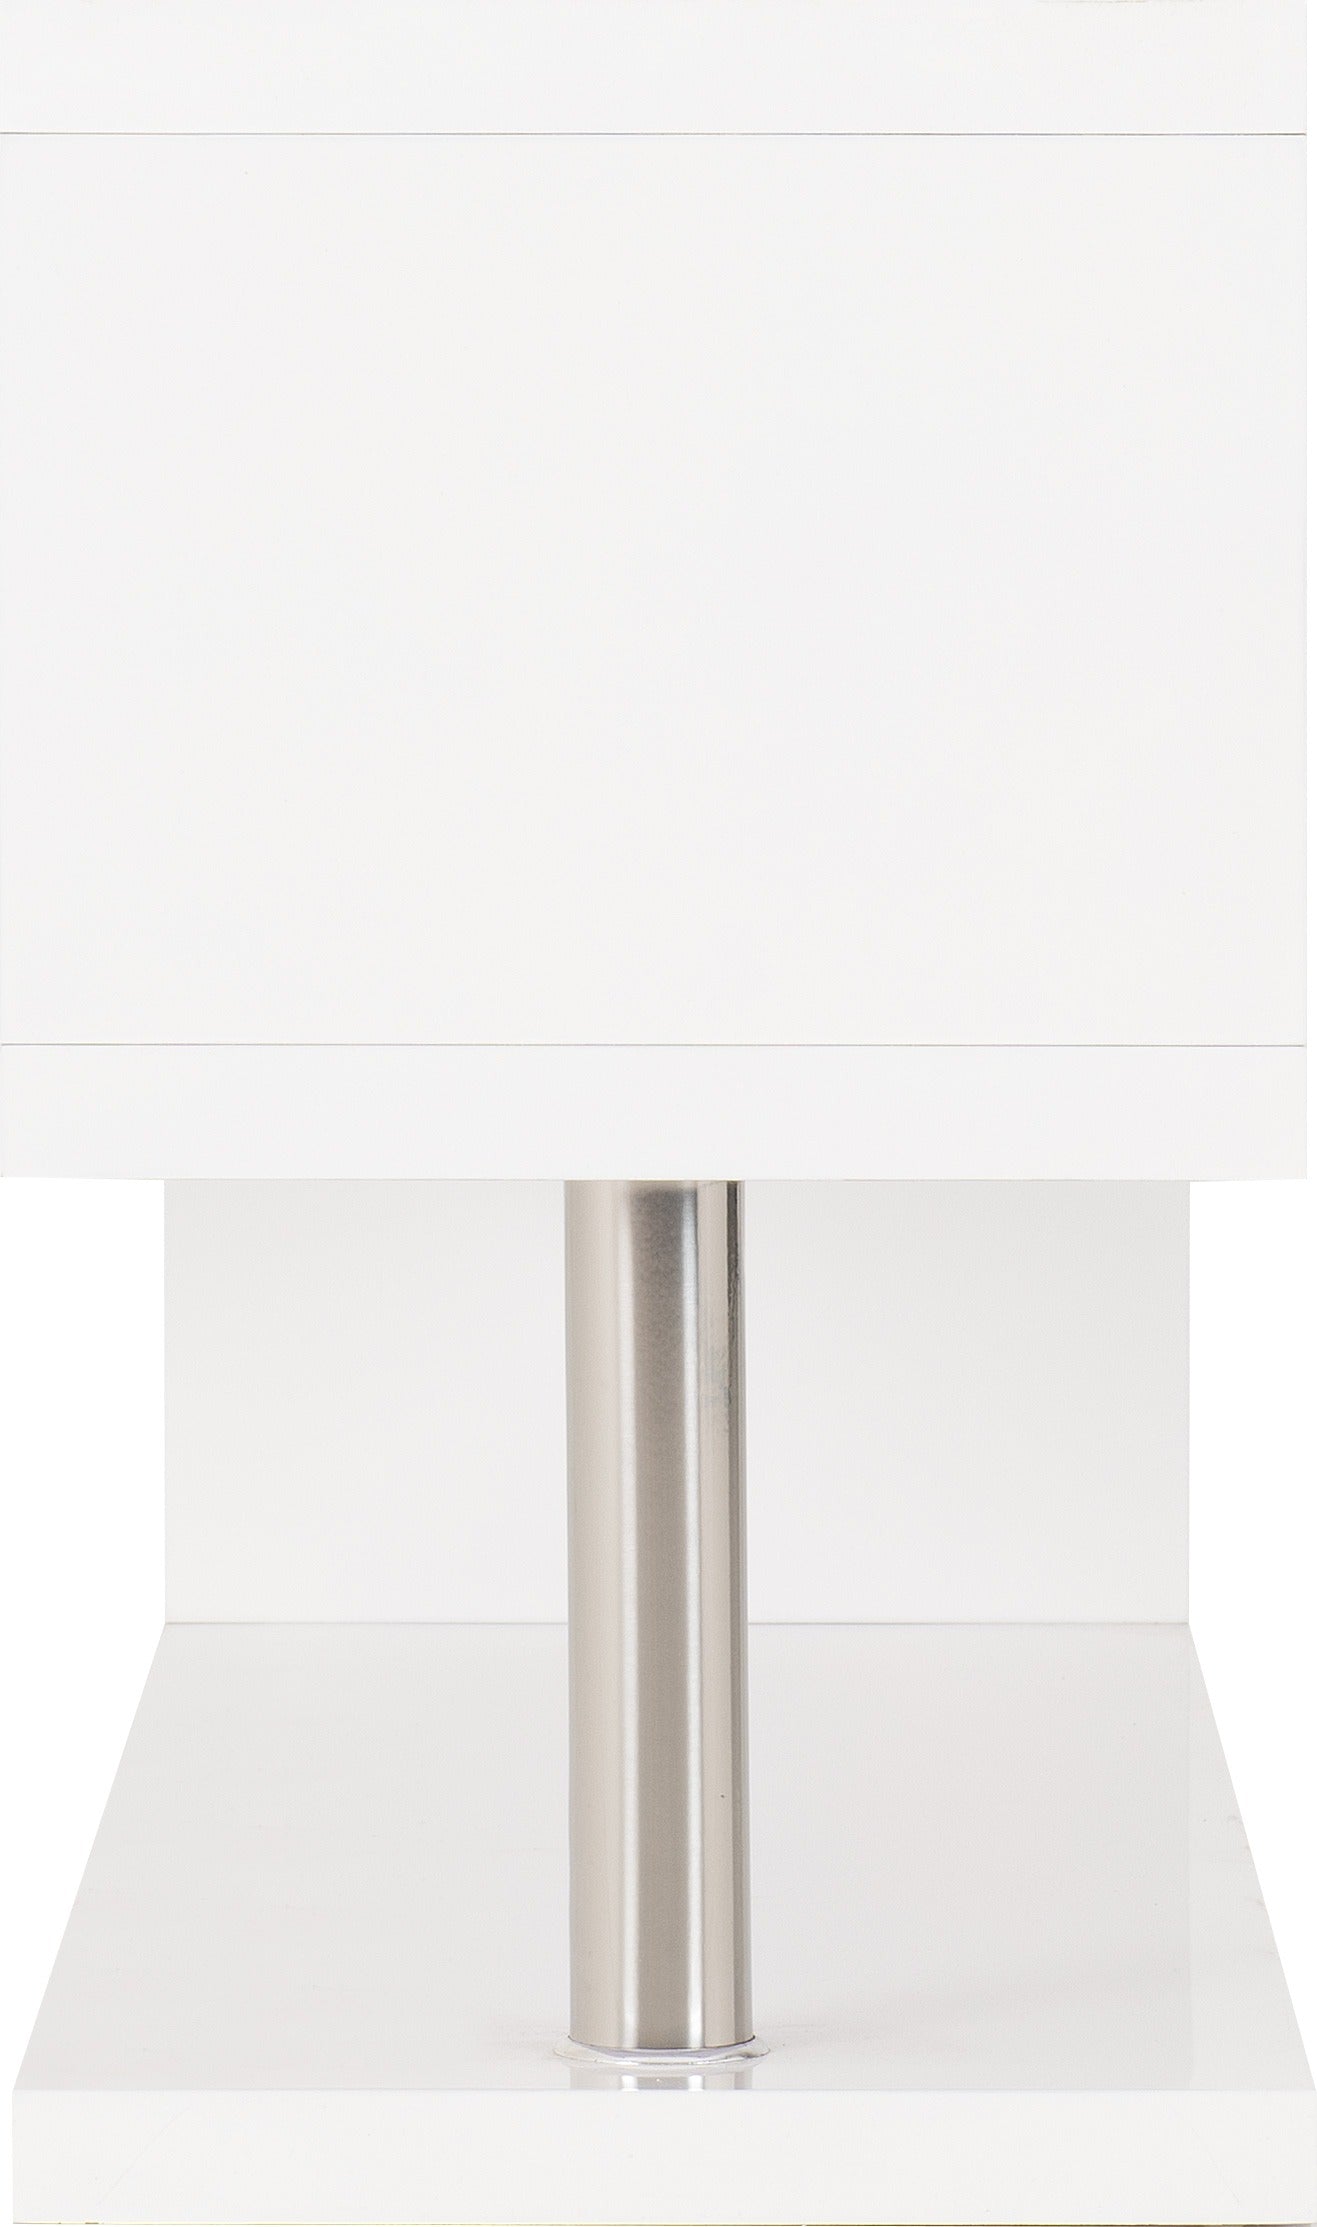 Charisma TV Stand - White Gloss/Chrome - The Right Buy Store